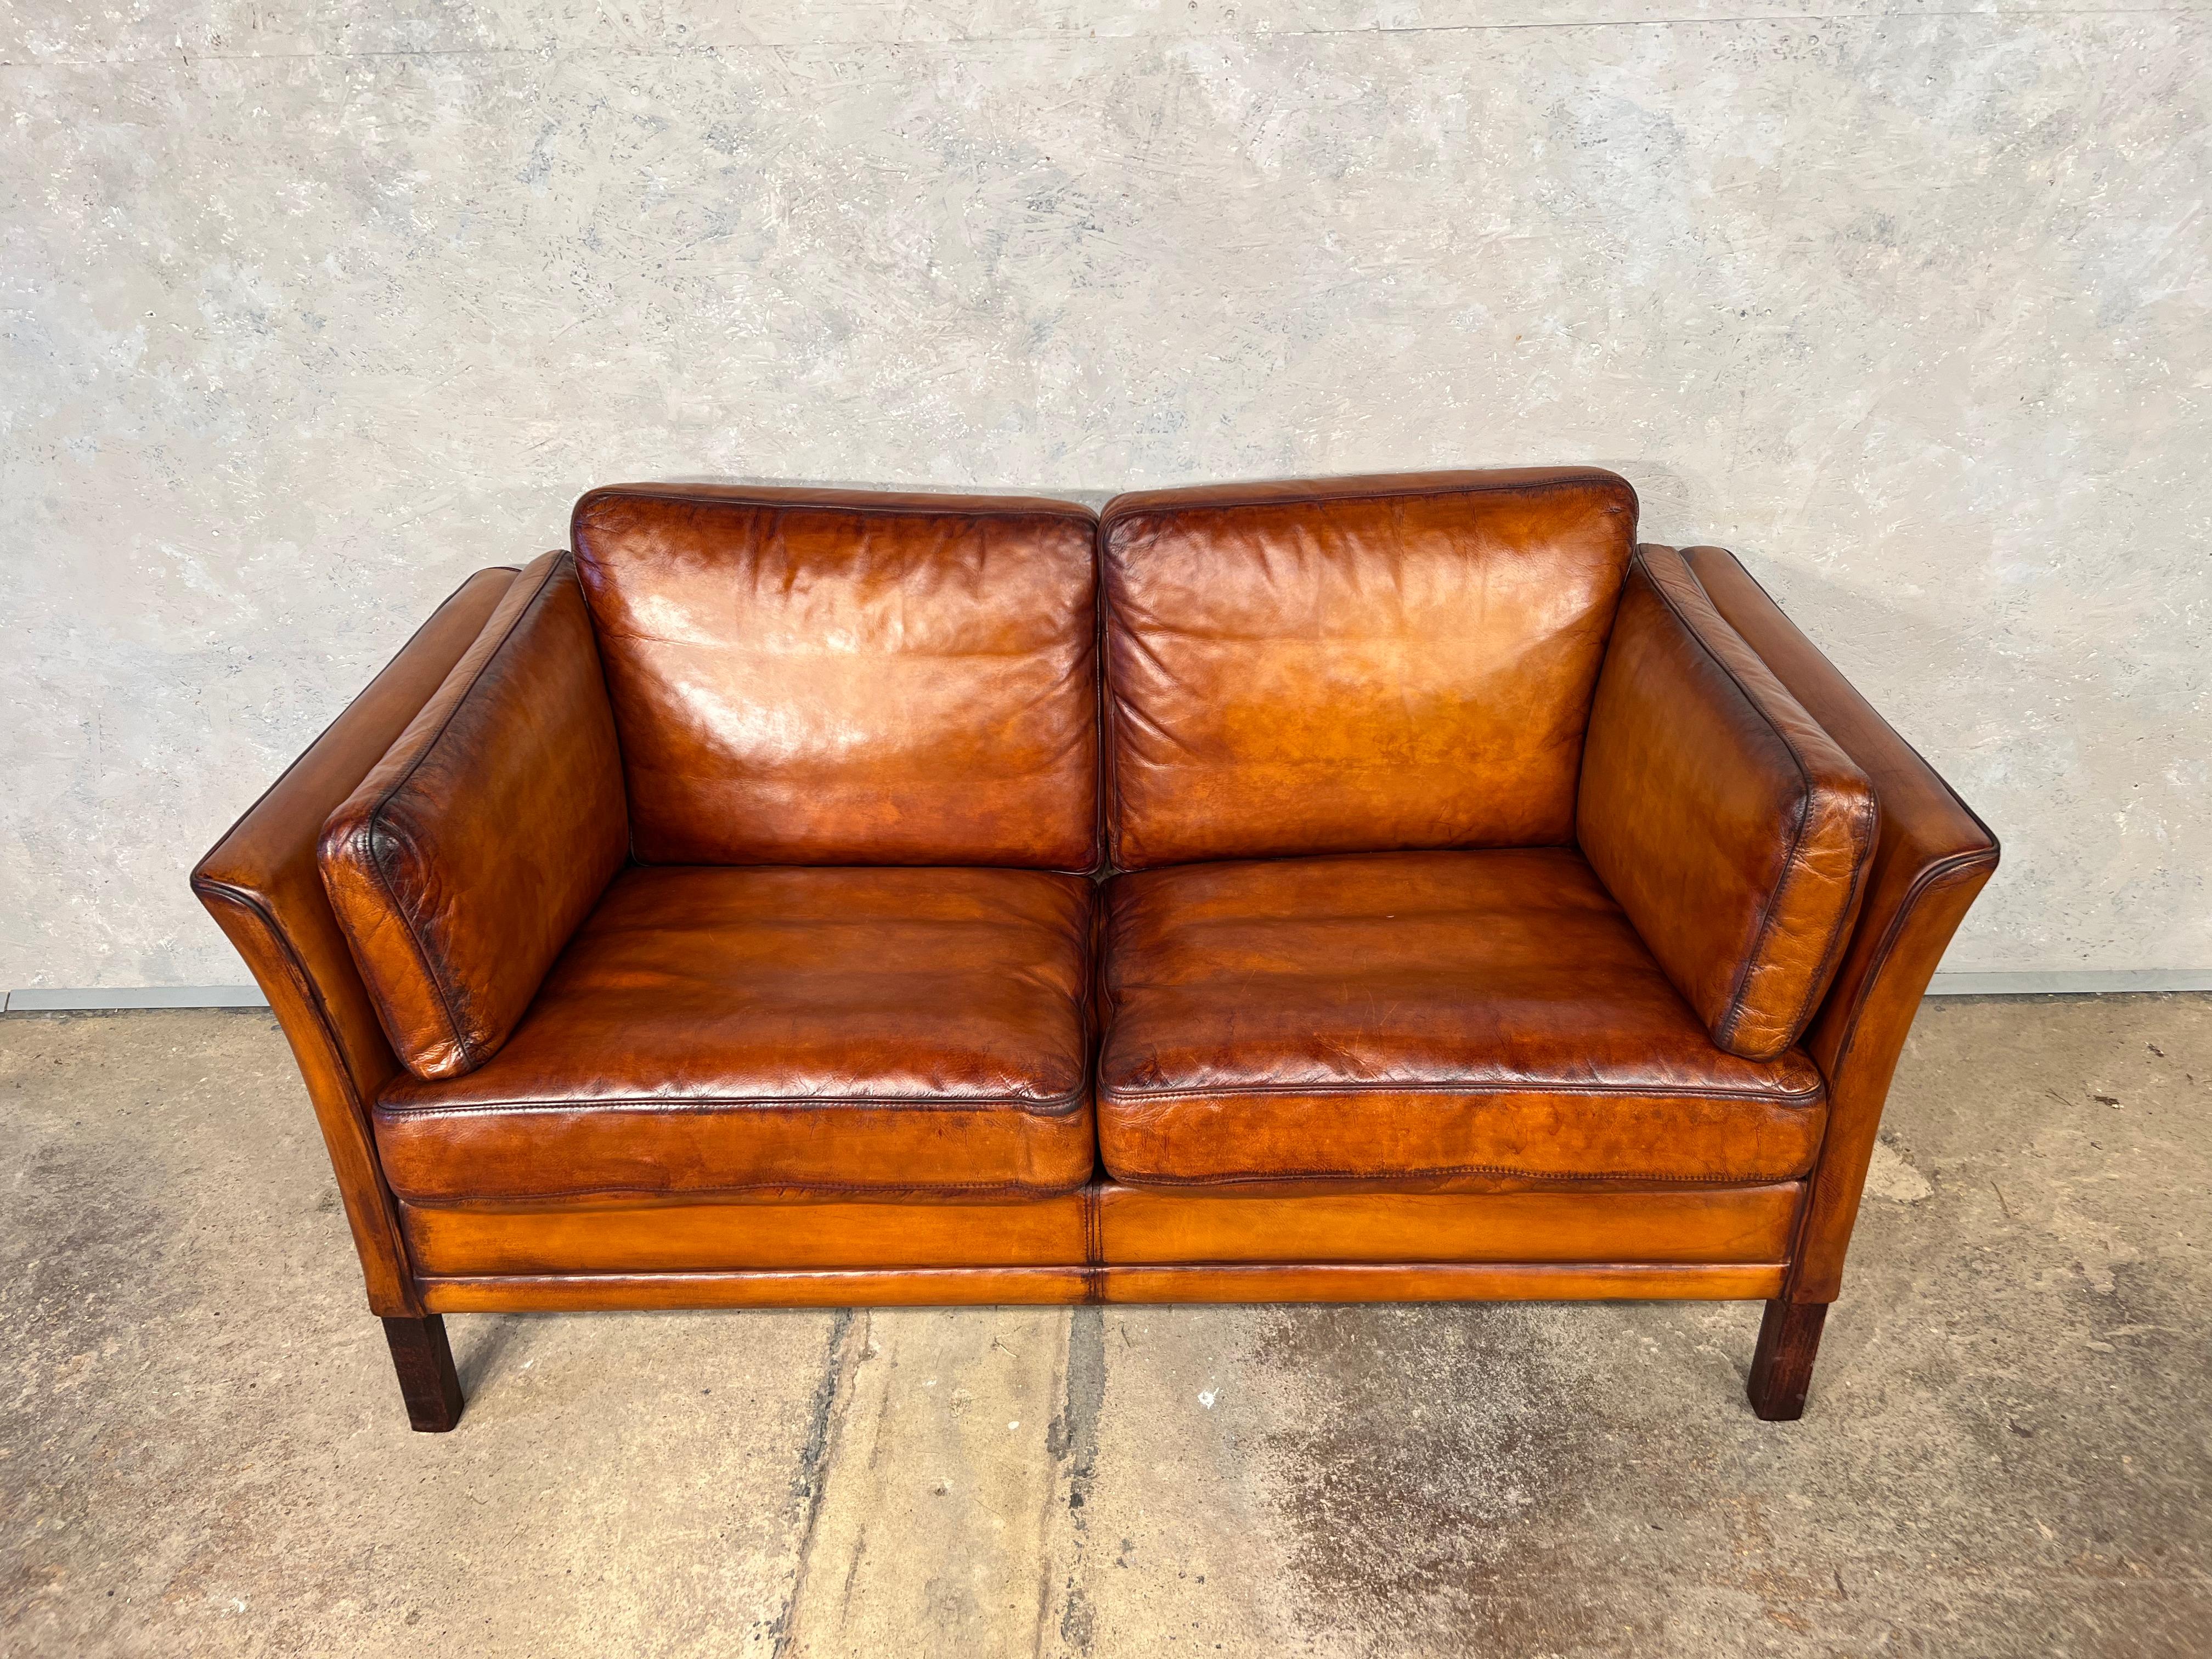 A Stylish Danish 1970s sofa designed by Mogens Hansen, great design with beautiful lines, sits wonderfully.

Stunning hand dyed tan colour, great patina and finish.

Viewings welcome at our showroom in Lewes, East Sussex.